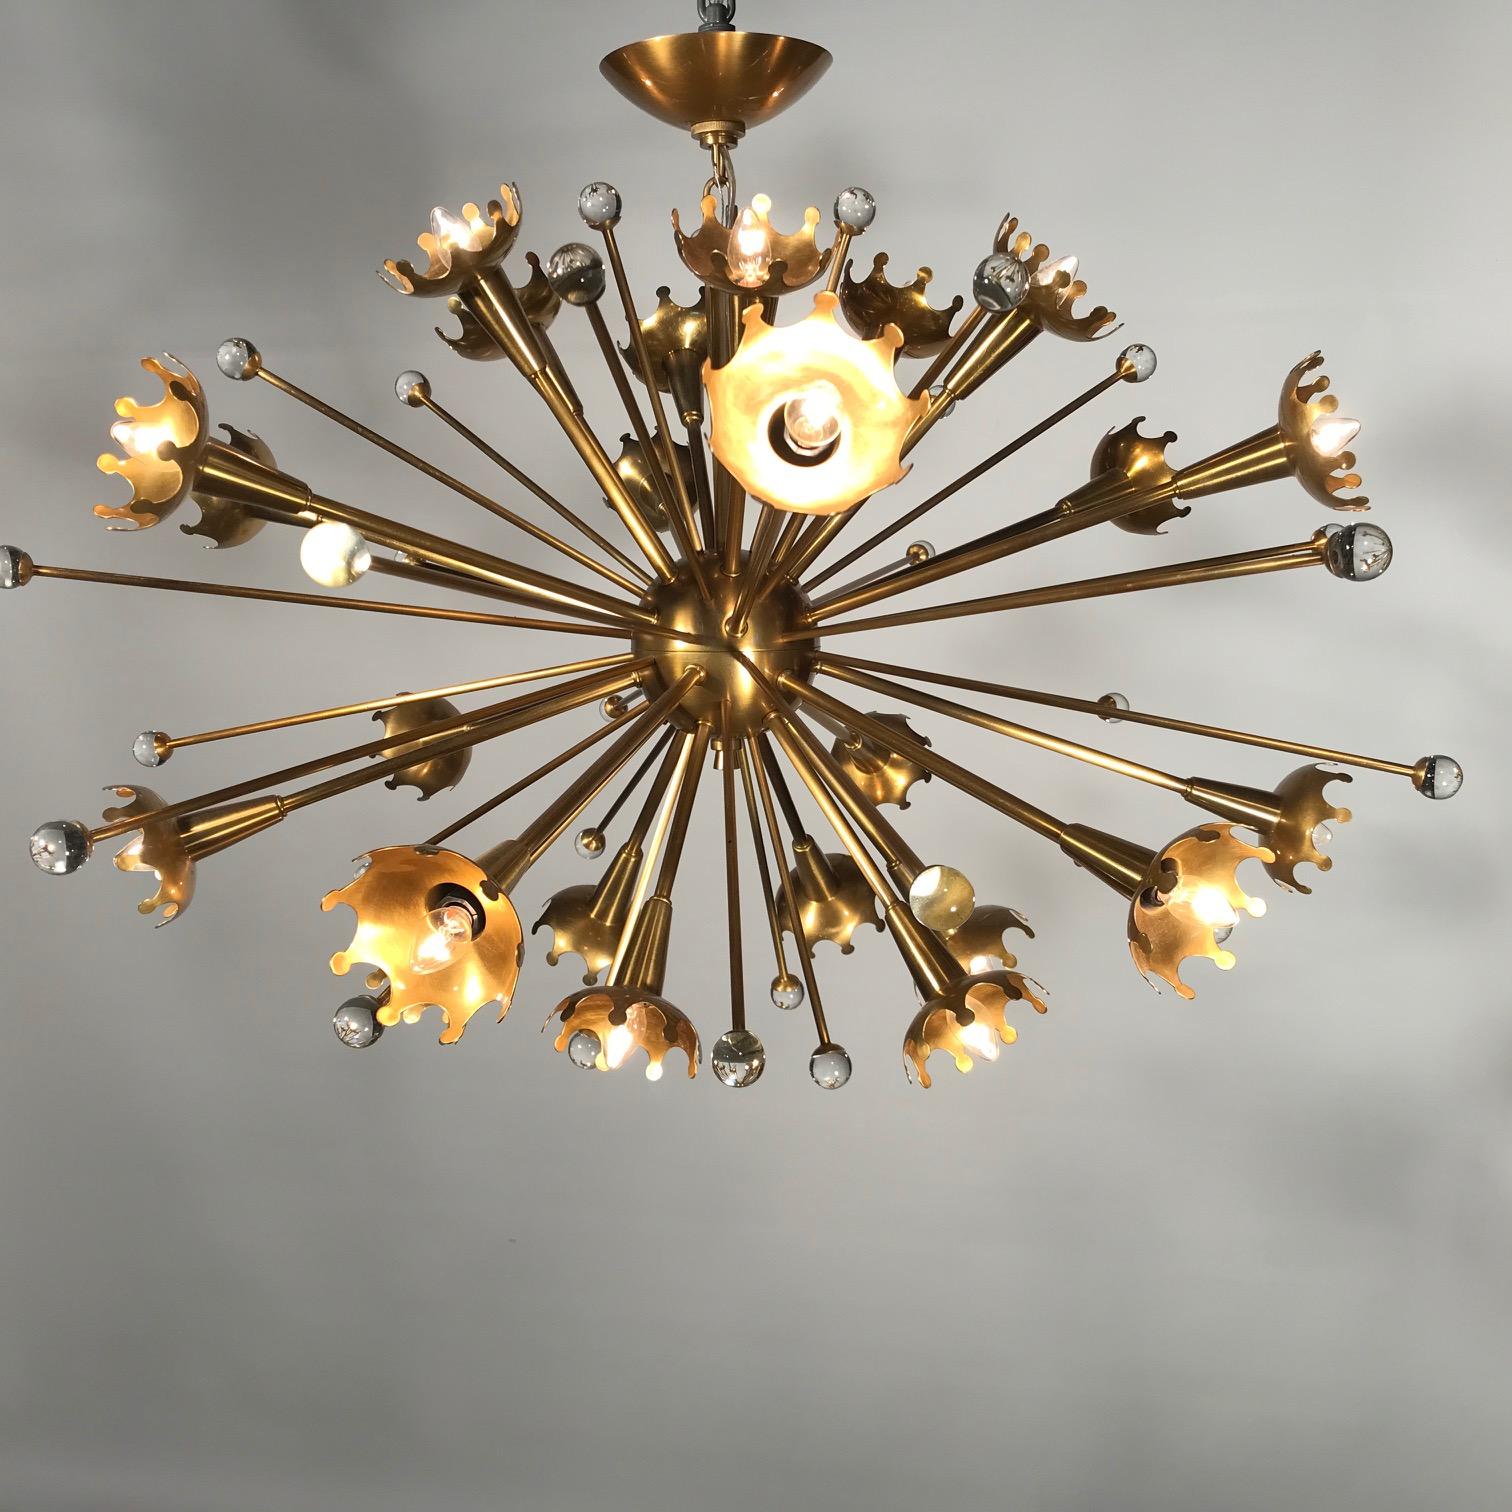 A classic twenty four light Sputnik chandelier by Jonathan Adler. At once futuristic and retro, funky and elegant, the Space Age-inspired Sputnik features numerous metal spokes shooting out from a central metal sphere, each accented by sparkling